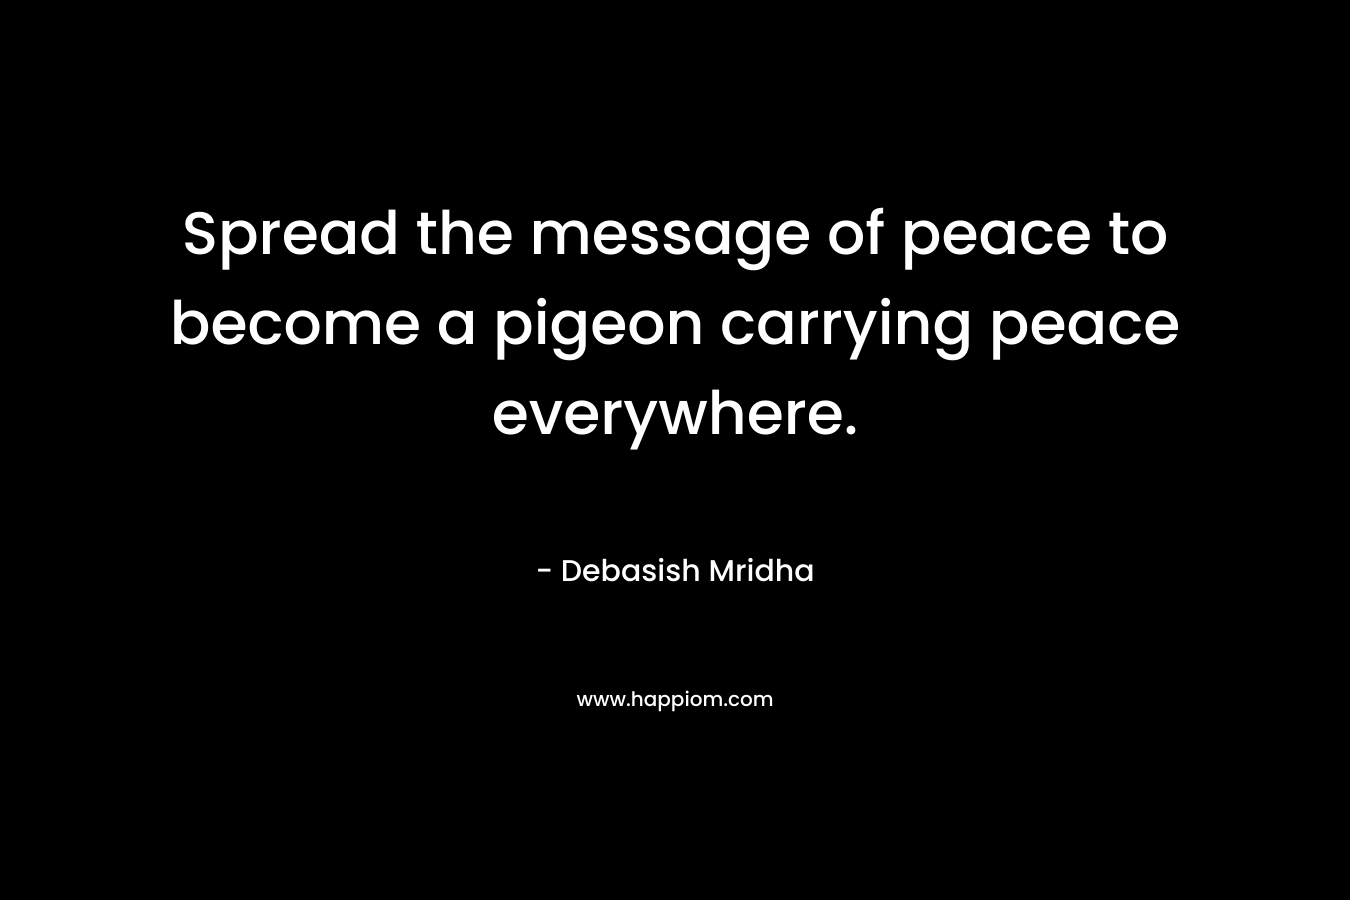 Spread the message of peace to become a pigeon carrying peace everywhere.